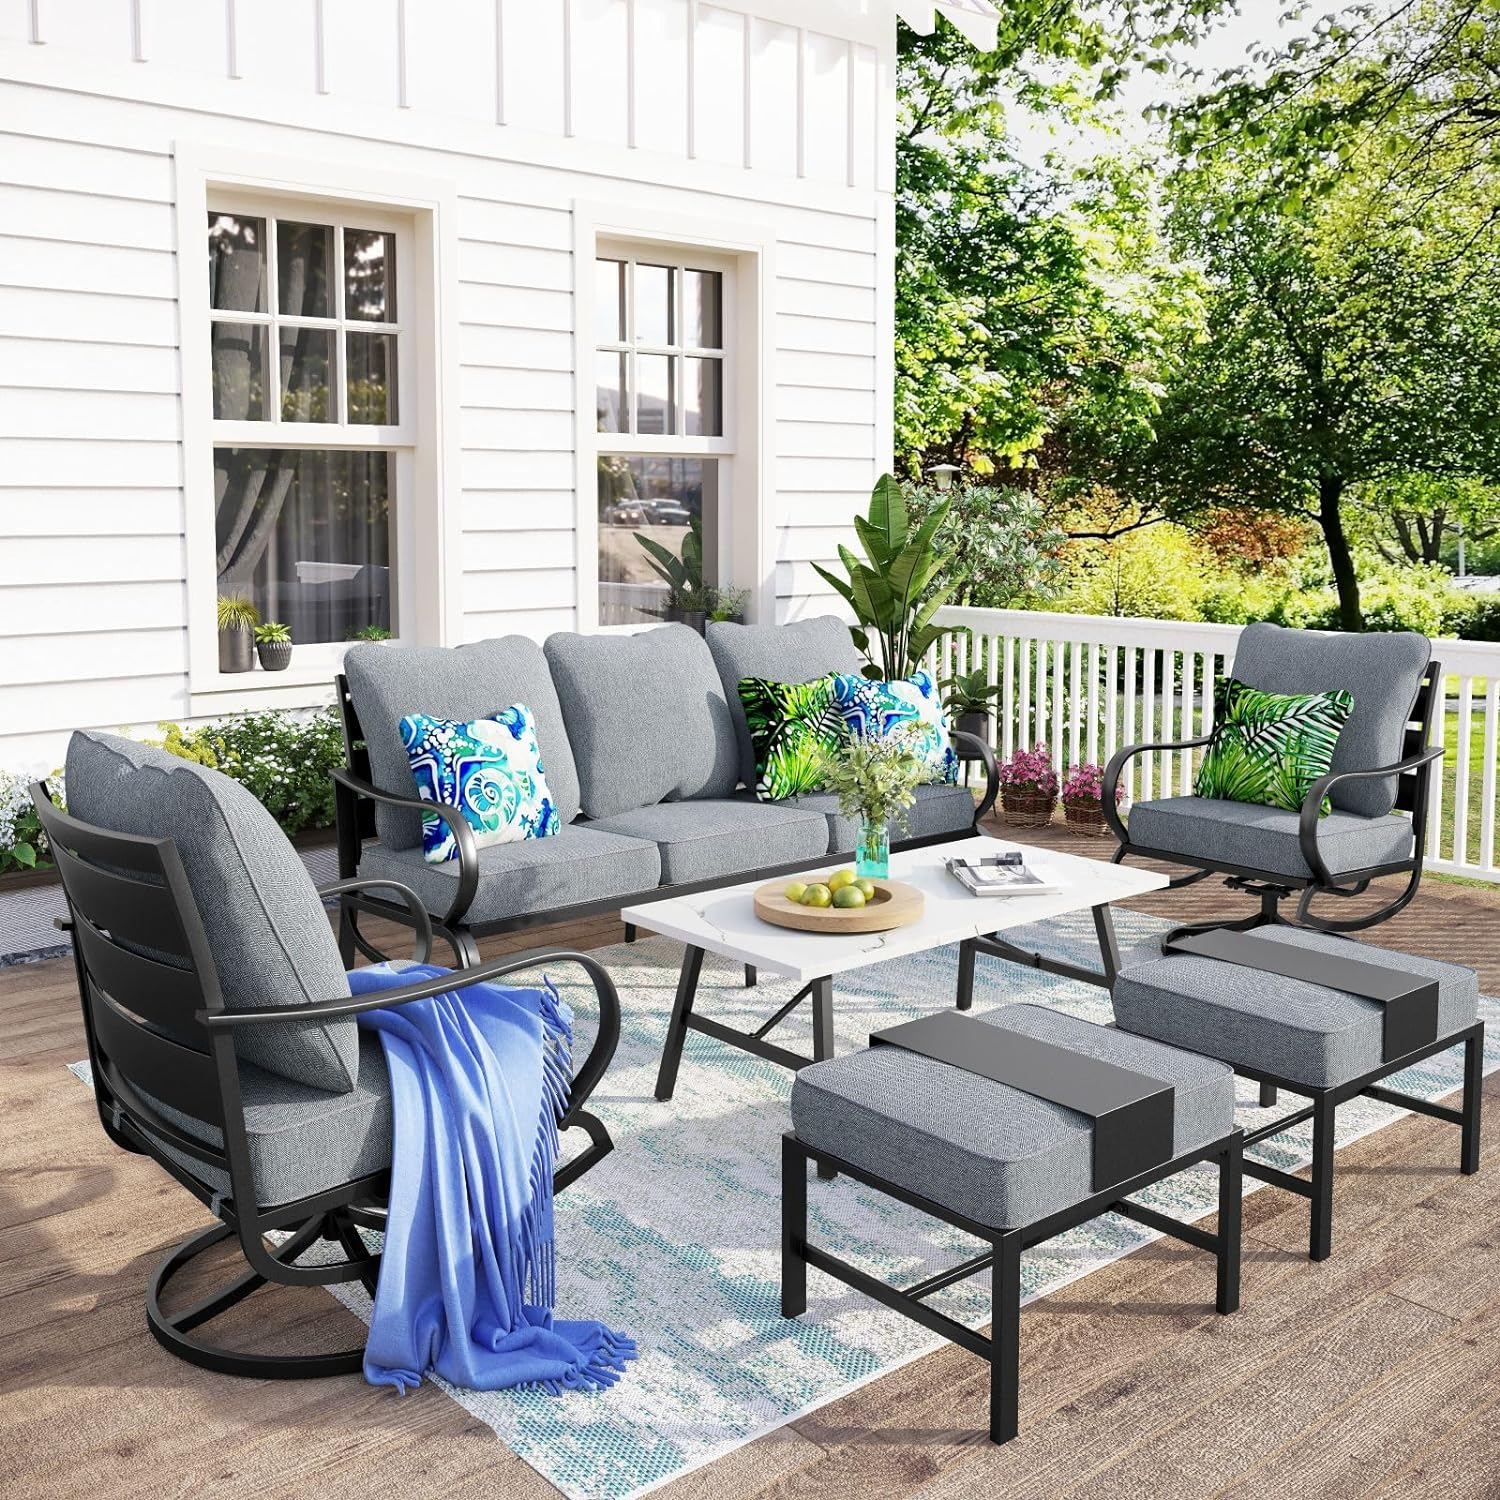 MFSTUDIO 6 Pieces Patio Conversation Sets(7 Seat),Outdoor Metal Furniture Sofas with 1 x 3-Seat Sofa,2 Swivel Chairs,2 Ottoman and & 1 Coffee Table,Wrought Iron Frame with Grey Cushion